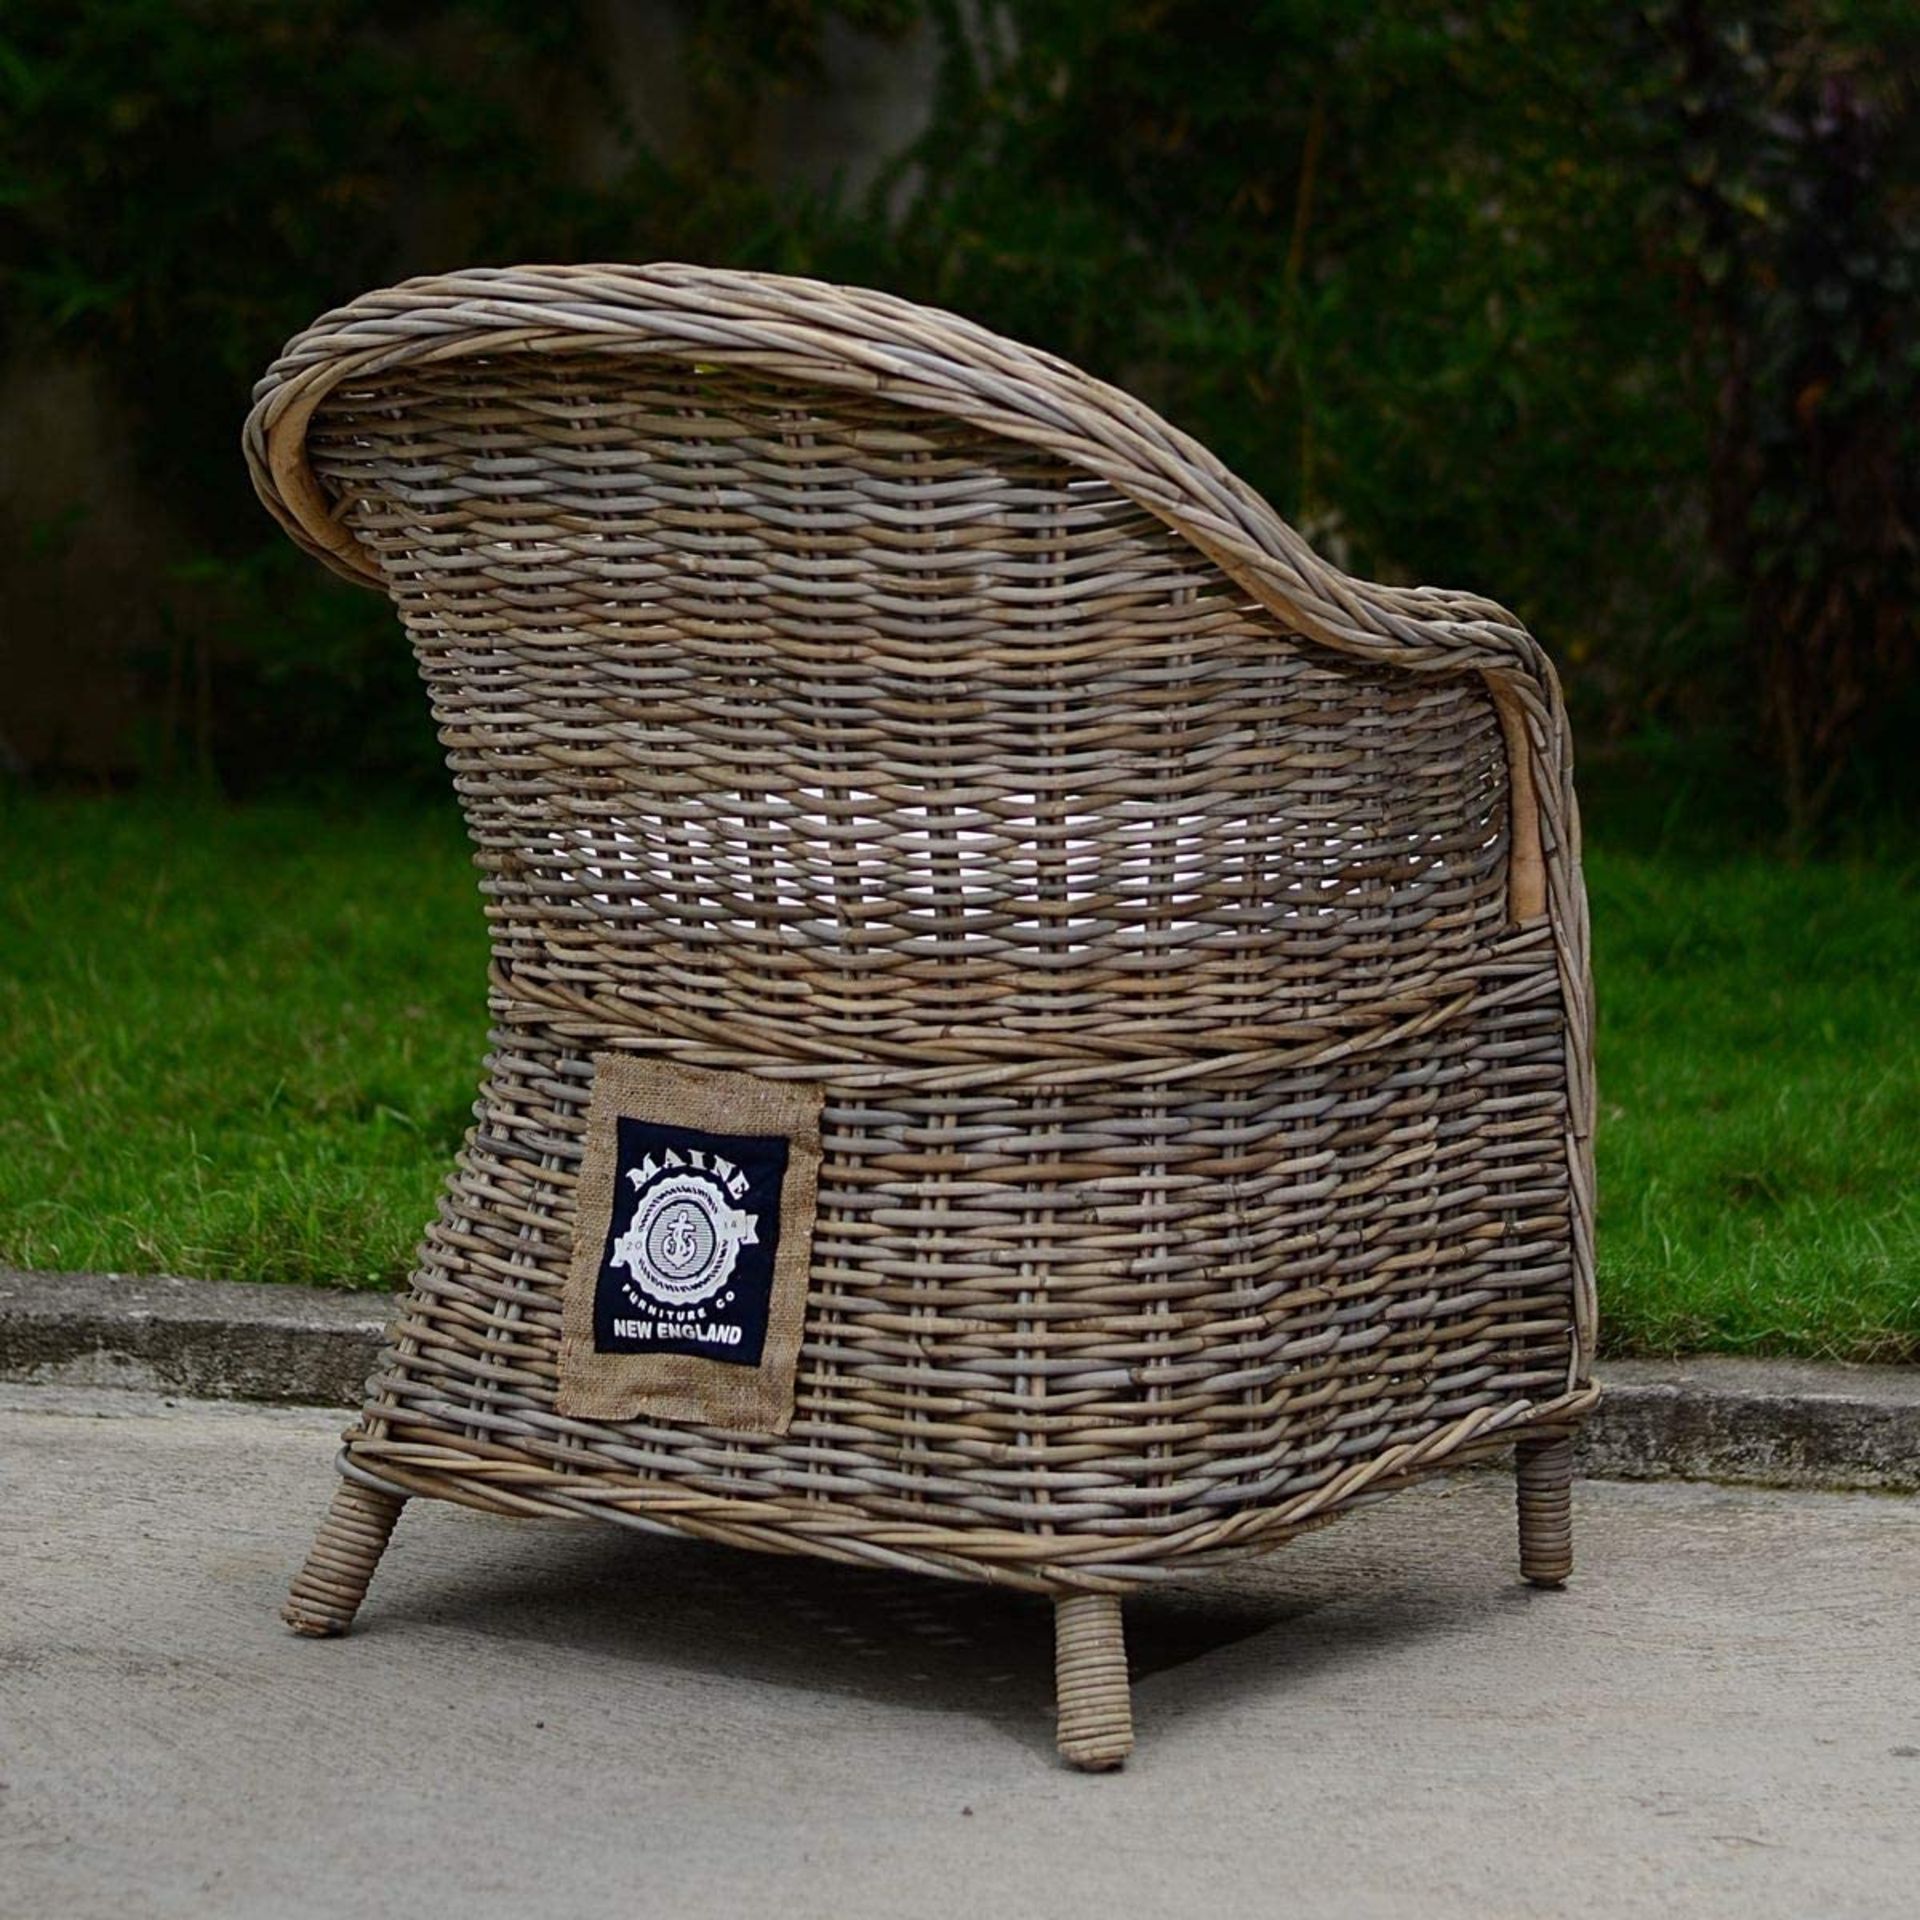 NEW & BOXED 2x Maine Furniture Co. Kubu Rattan Armchair with Cushion. (SR5). (SKU: M500156). STRONG, - Image 6 of 6